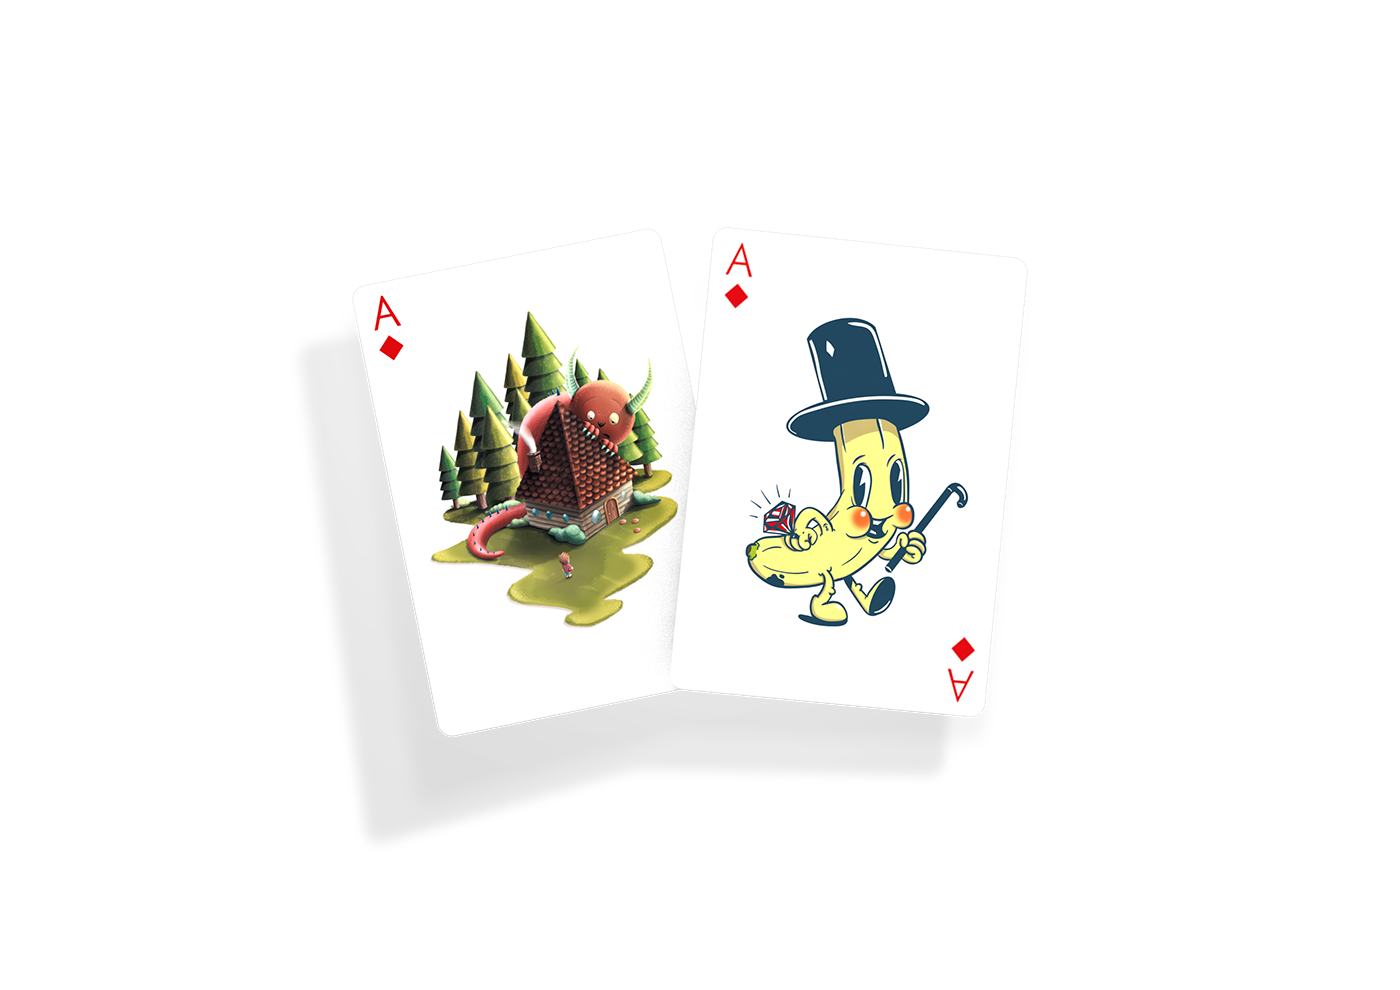 playing arts contest Playingartscontest banana card deck Competition where the wild things Monopoly diamond  ace